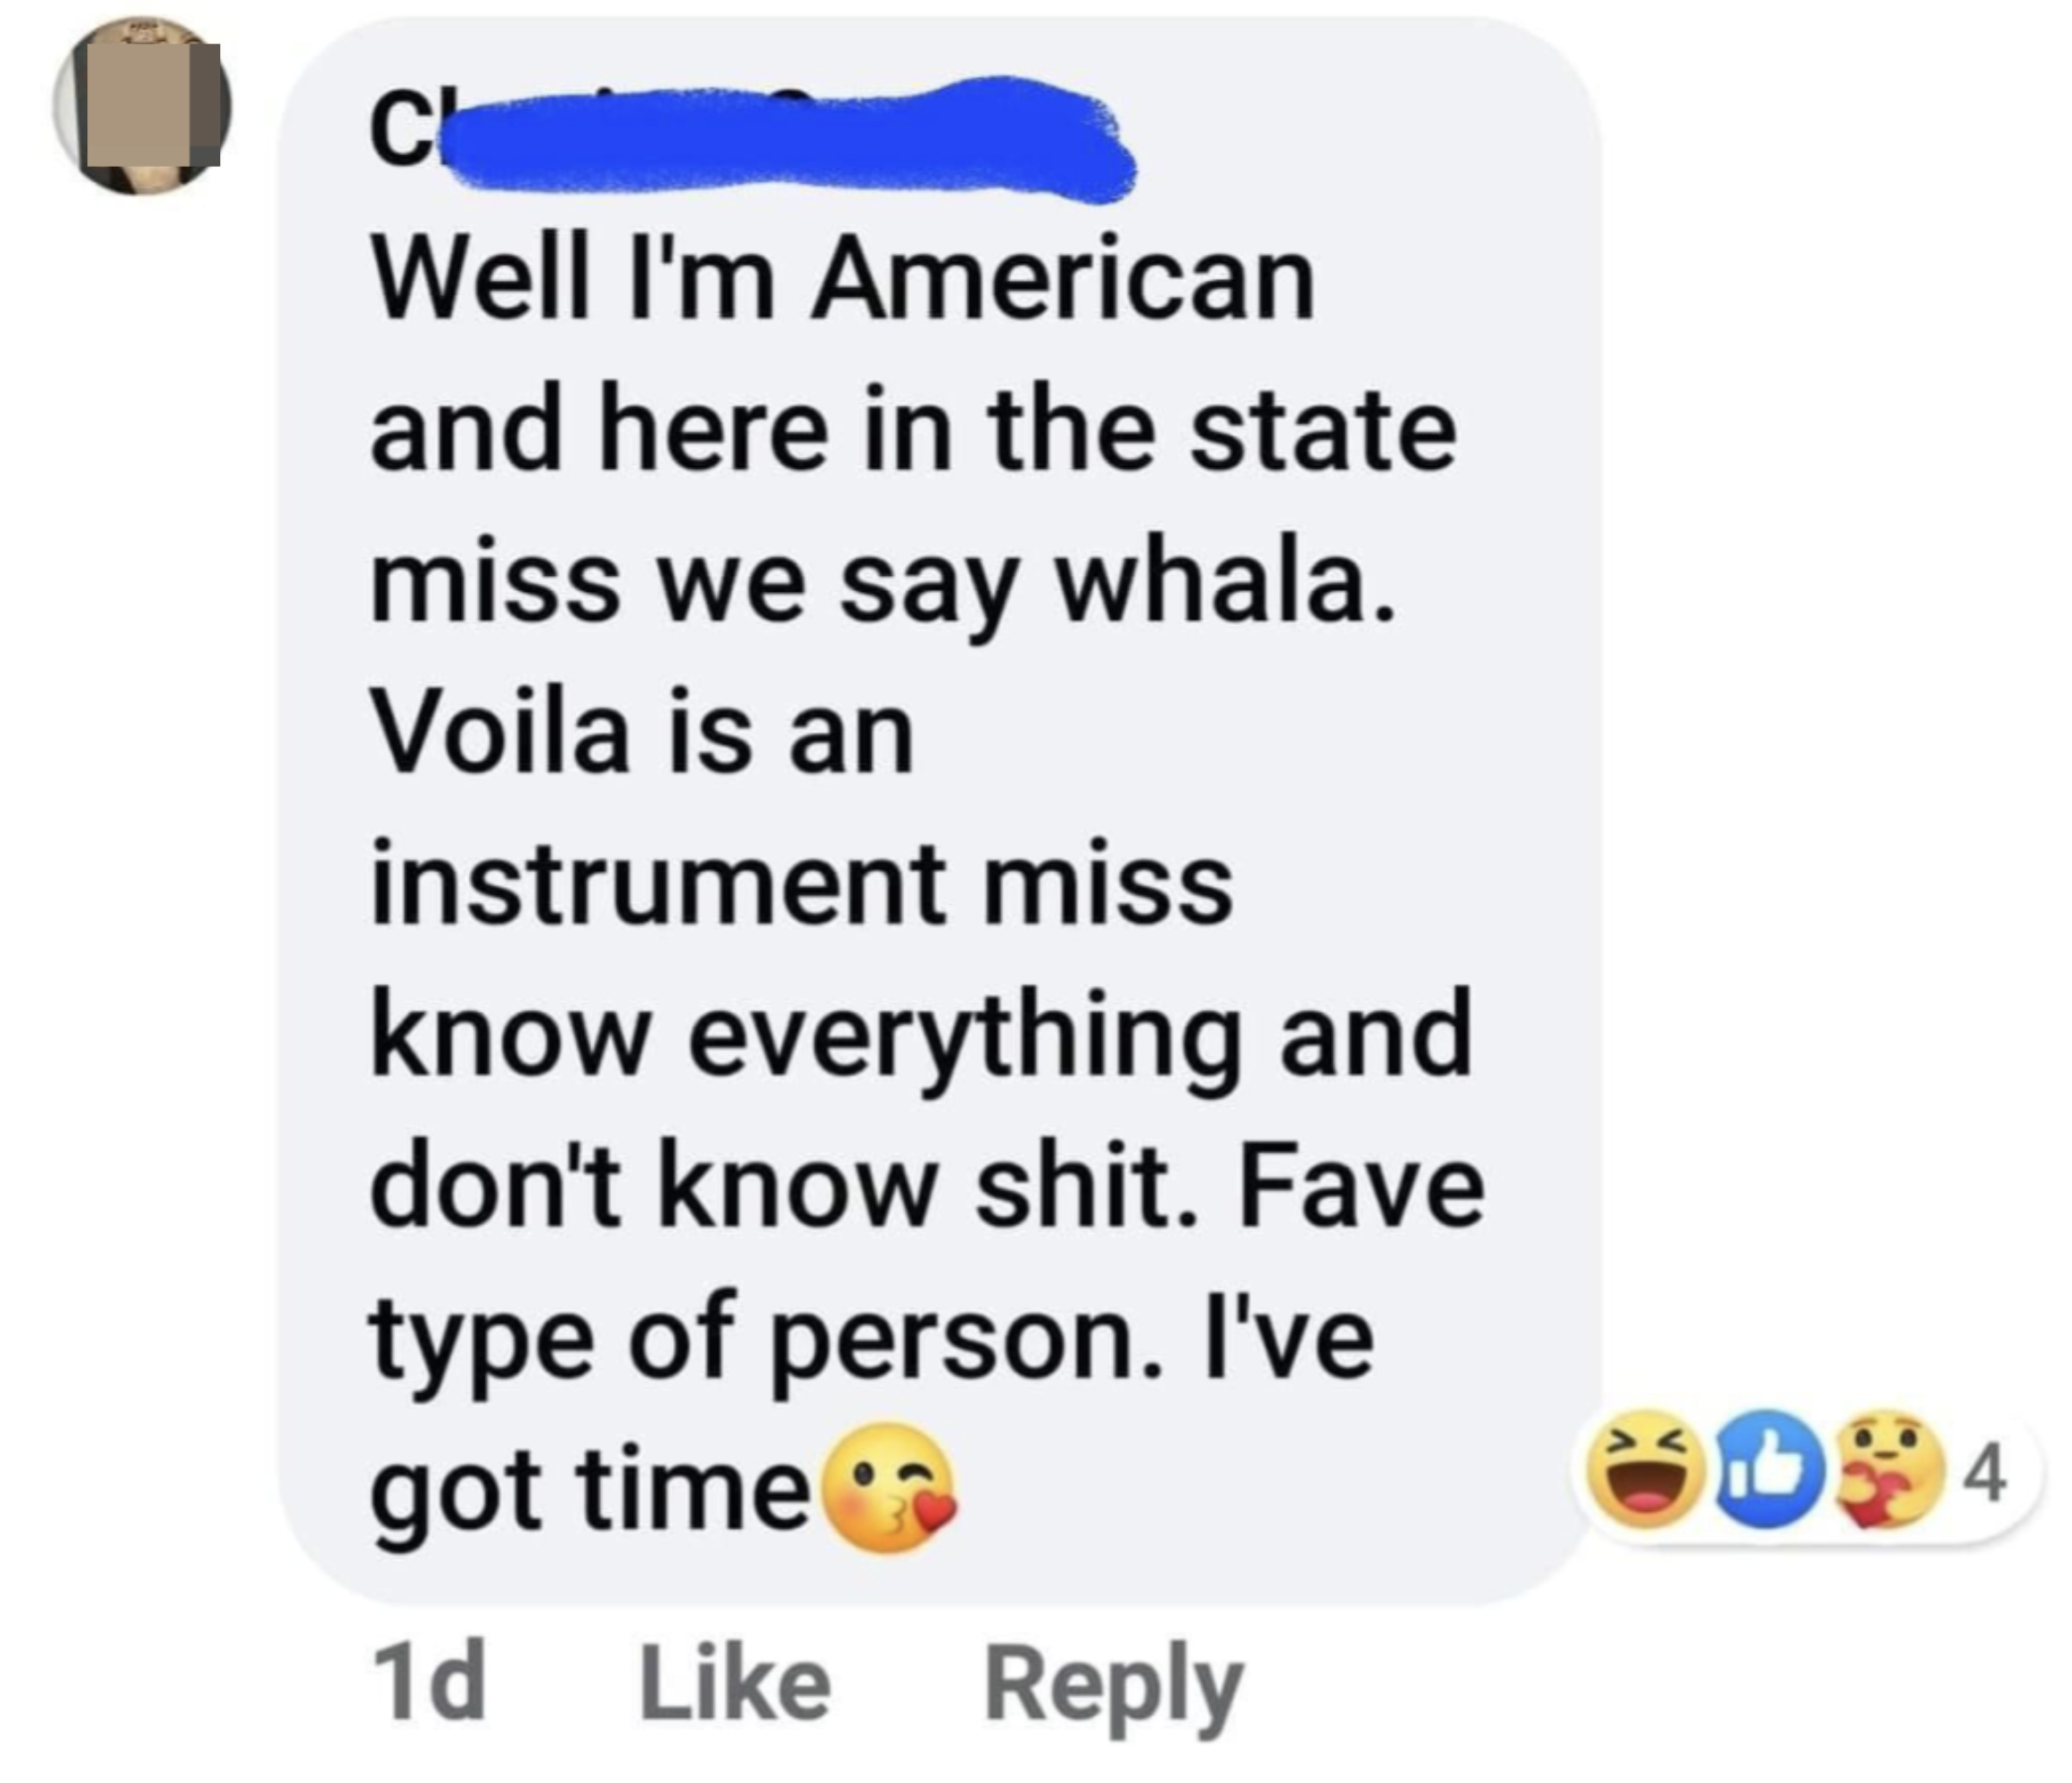 &quot;I&#x27;m American and here in the state miss we say whala; voila is an instrument miss know everything and don&#x27;t know shit&quot;